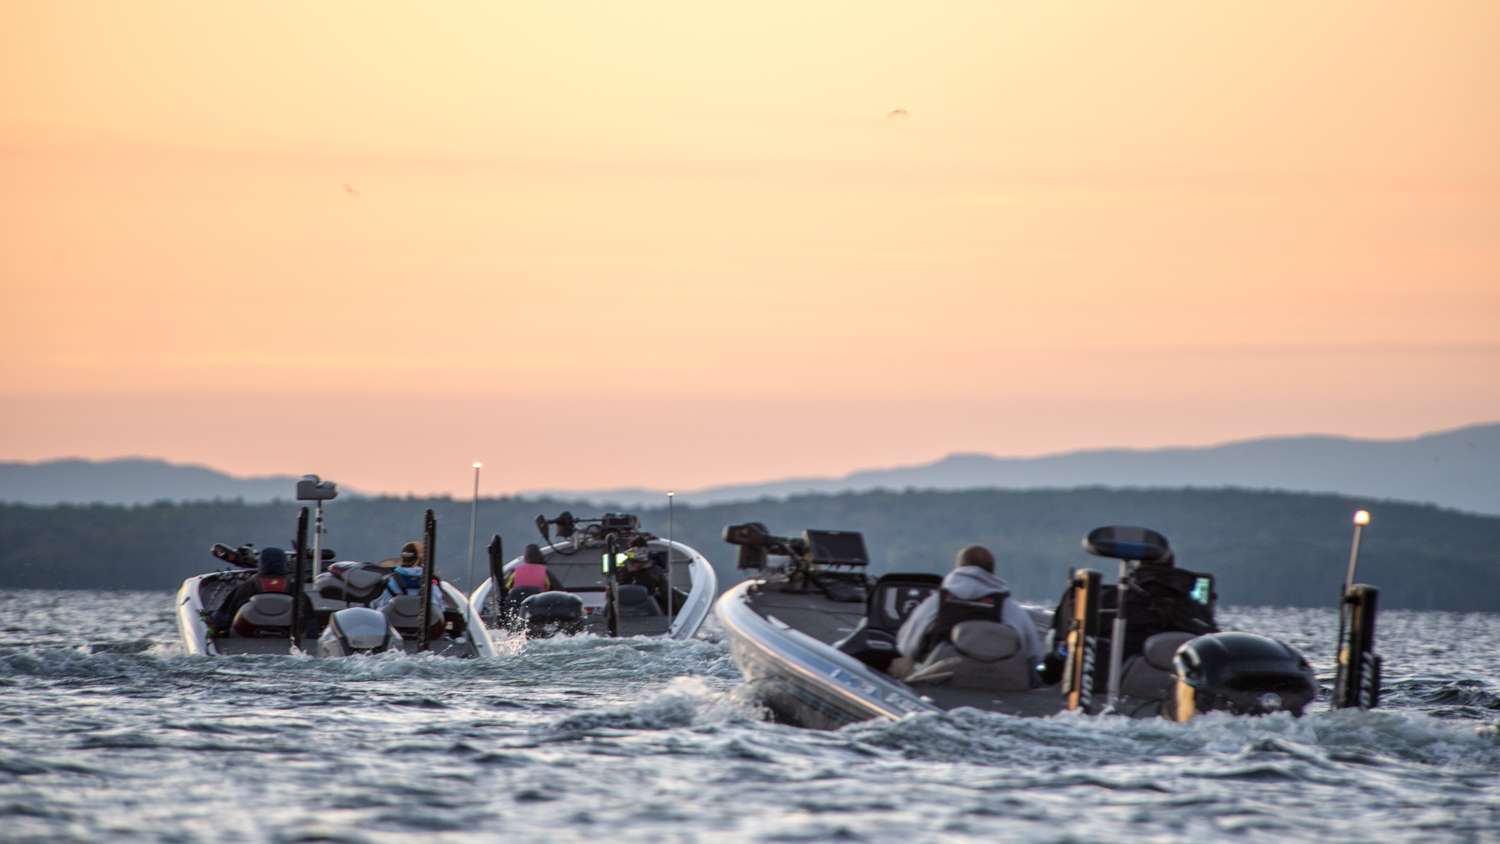 The first anglers of the morning head out to begin Day 1.